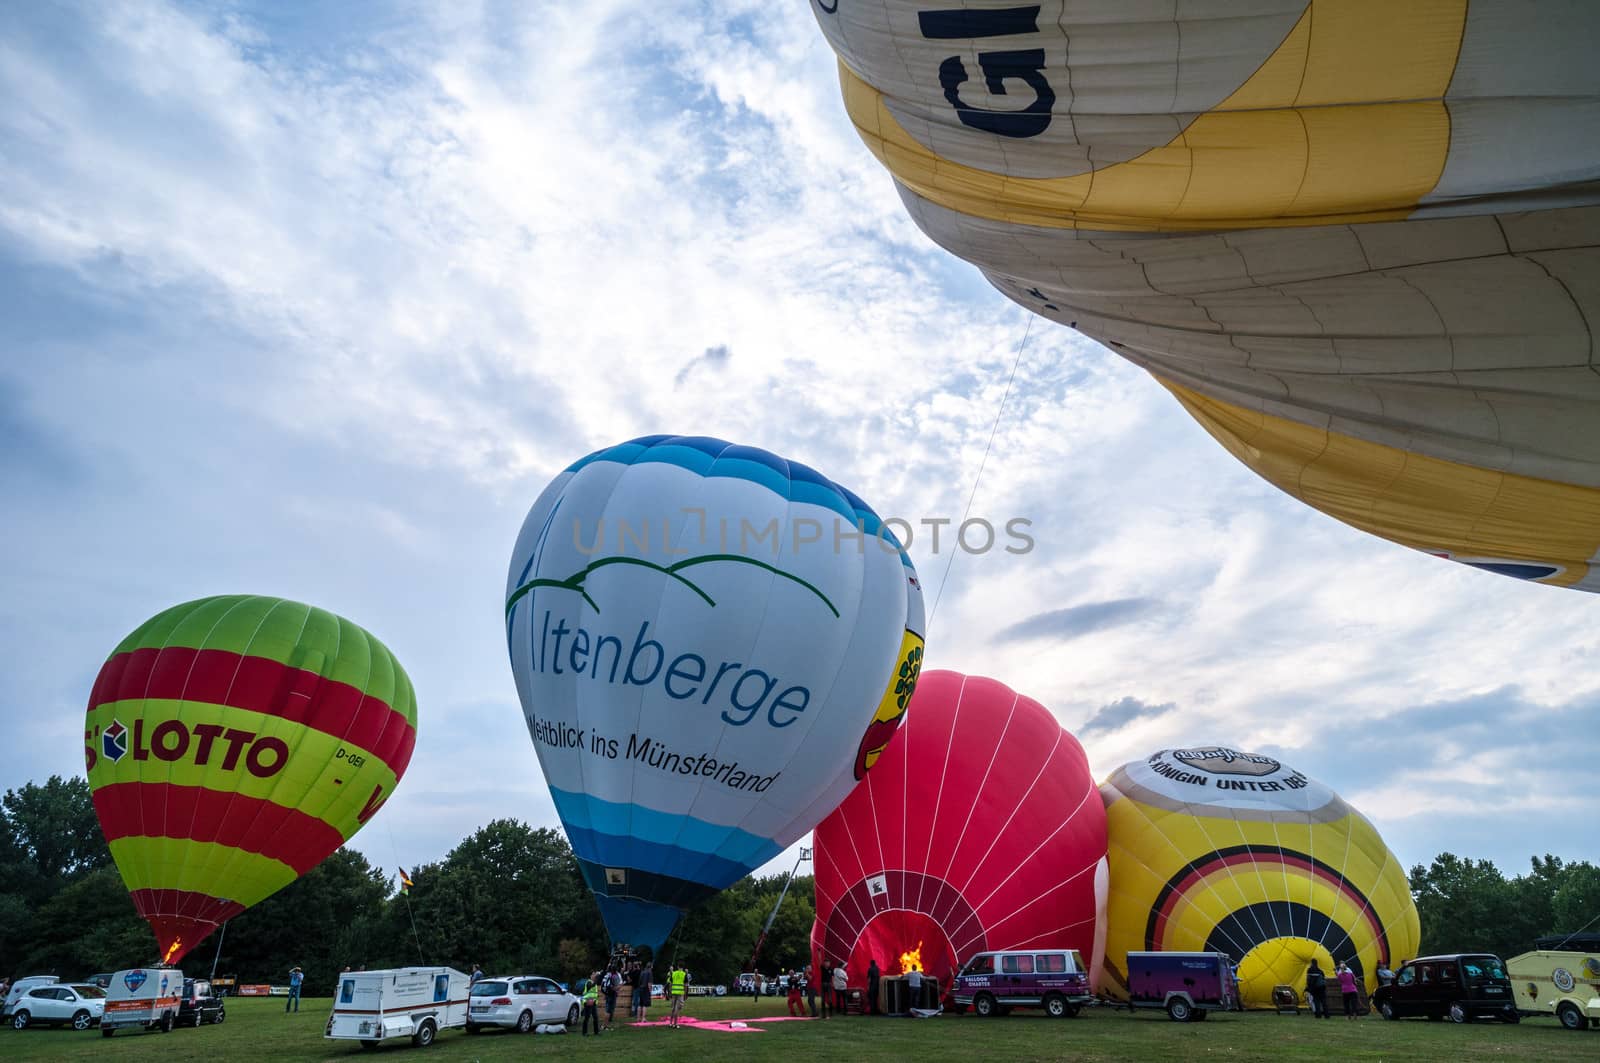 Hot air balloon festival in Muenster, Germany